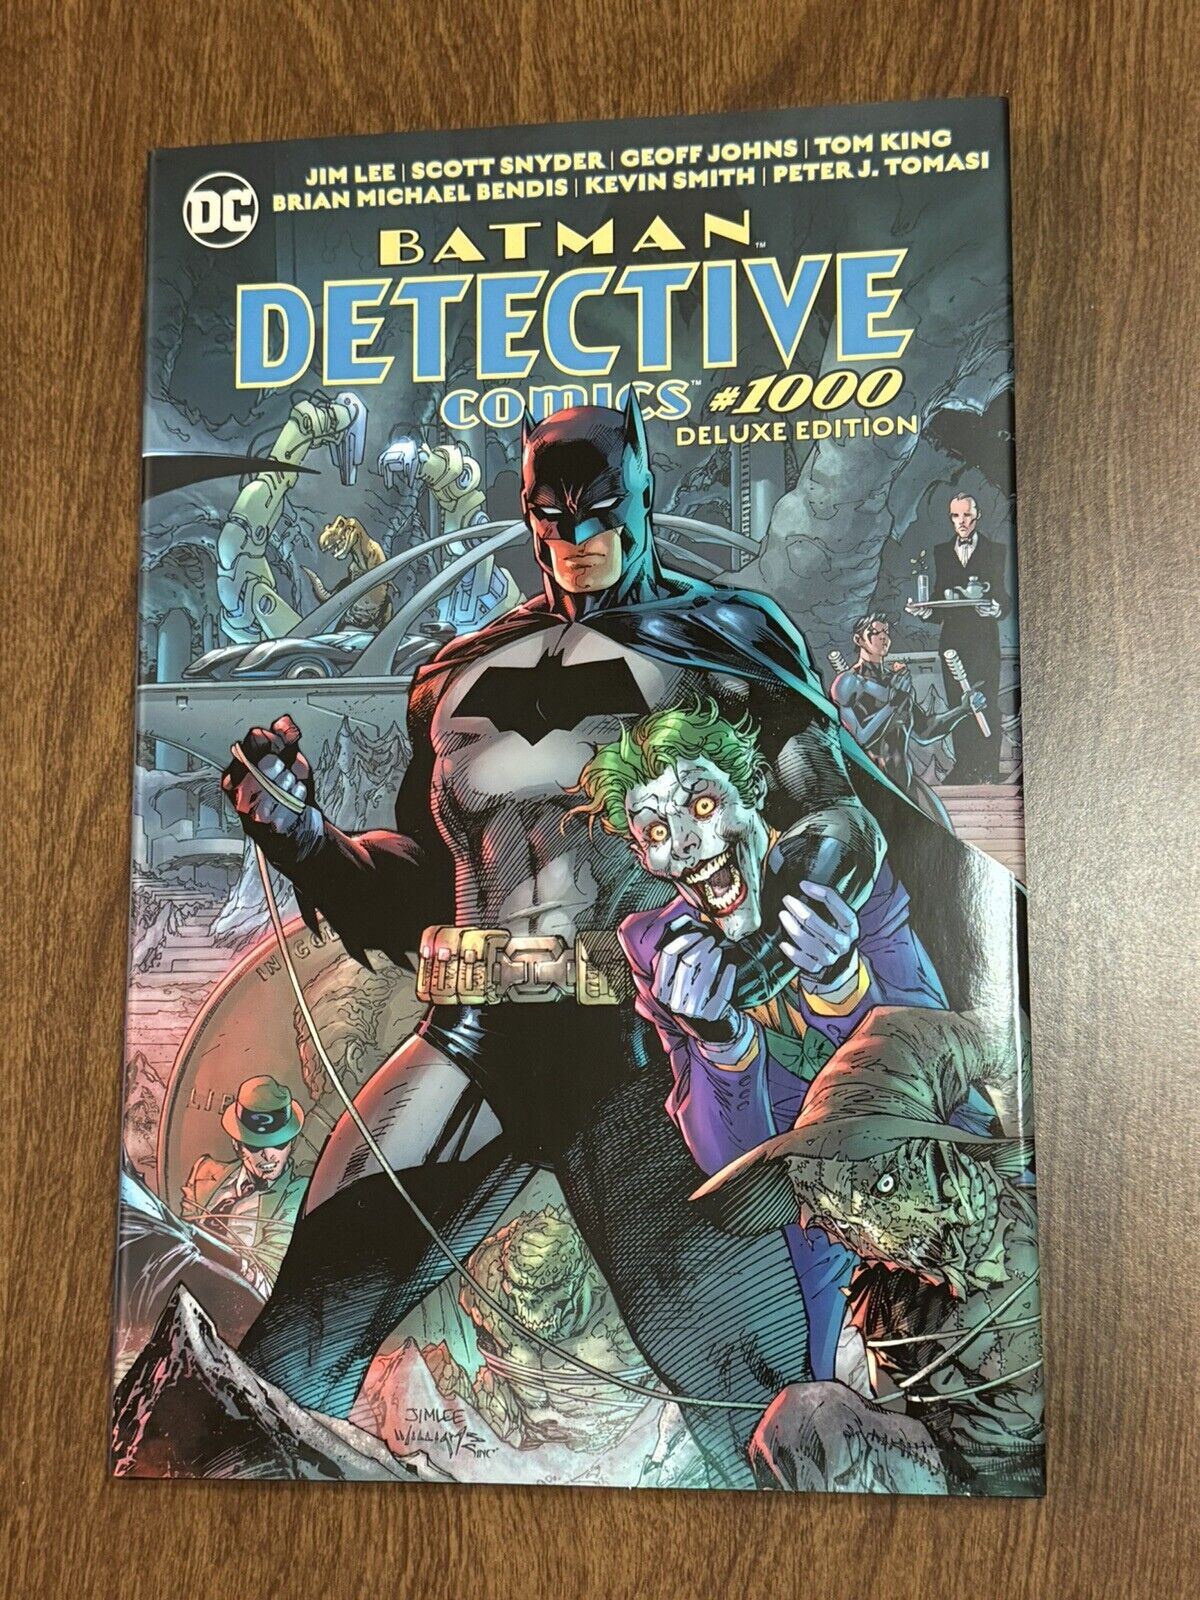 Detective Comics #1000: the Deluxe Edition Hardcover (DC Comics August 2019)